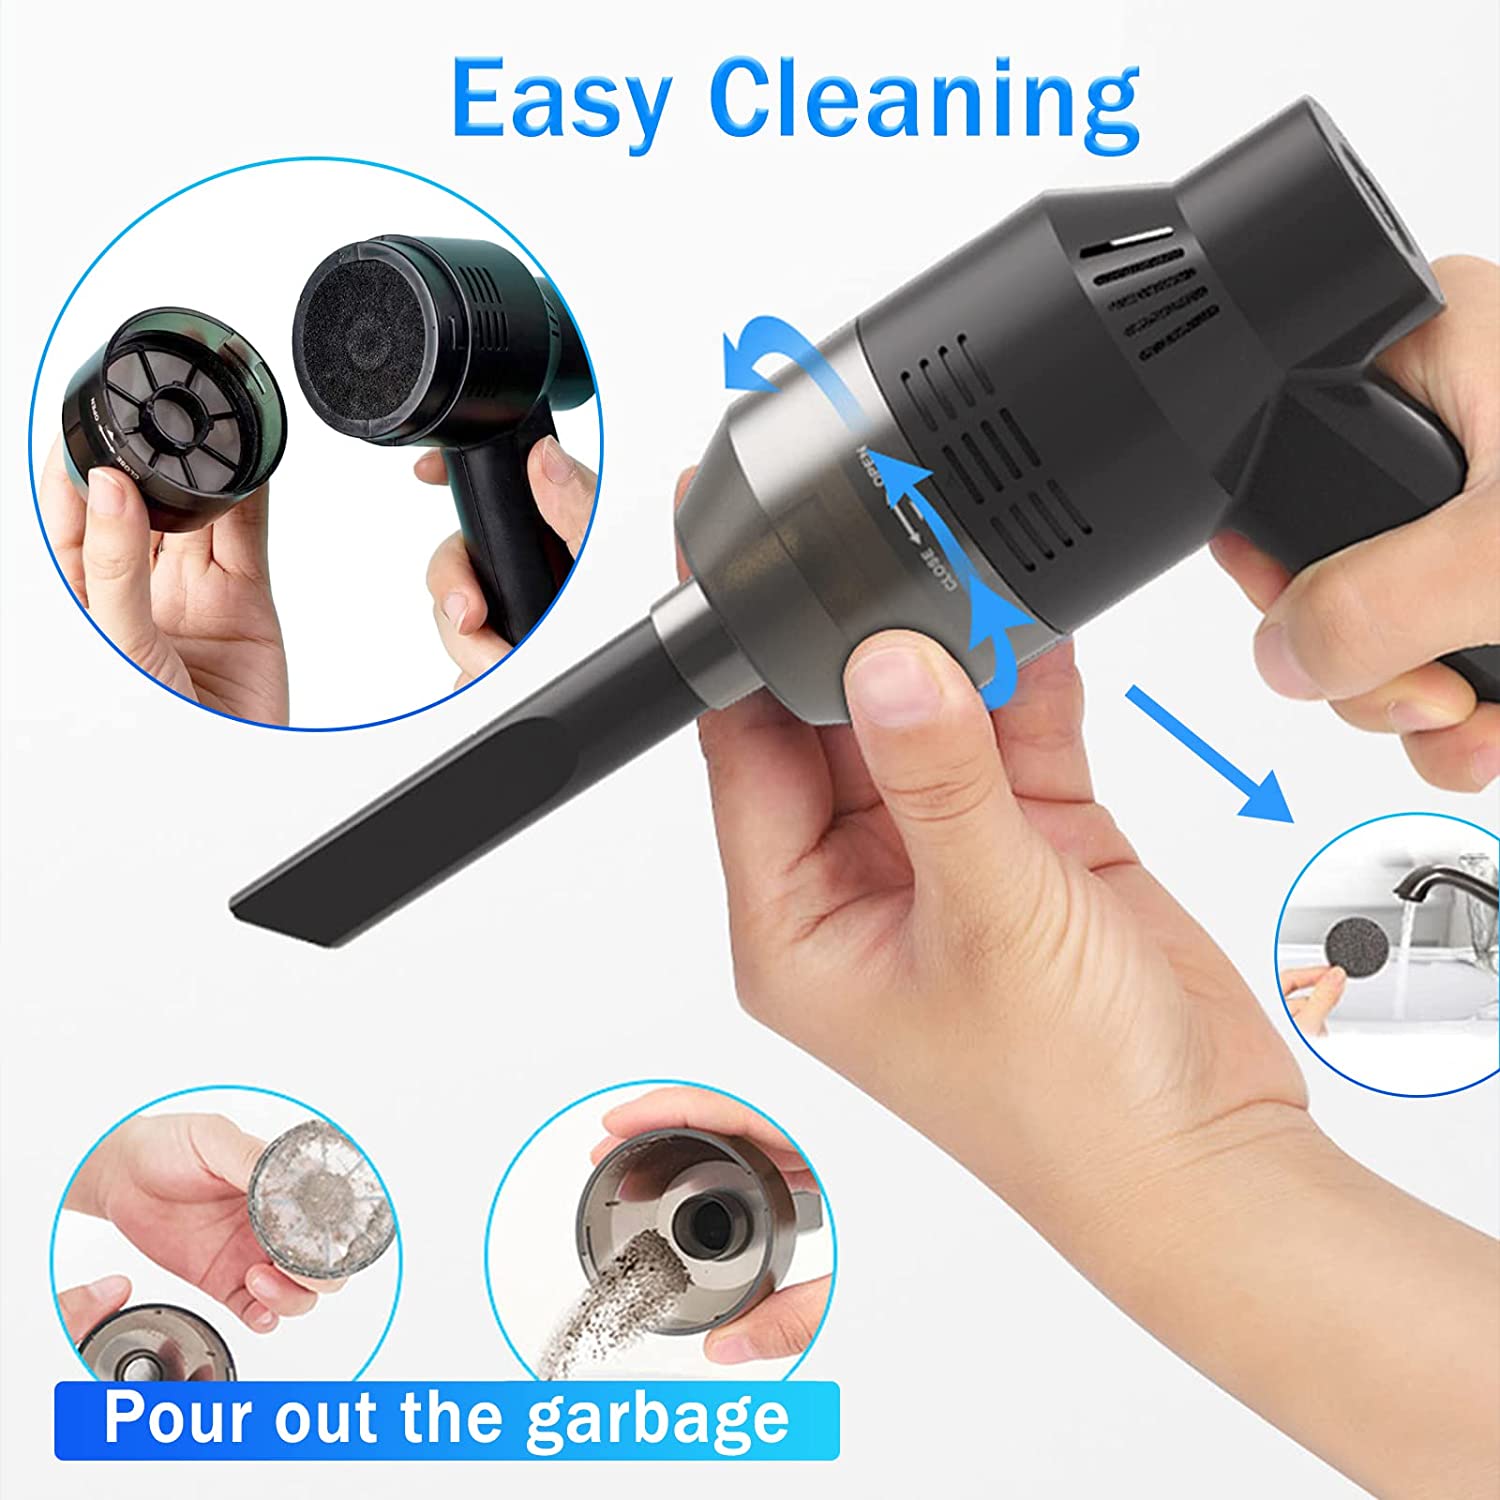 Keyboards-Keyboard-Cleaner-Powerful-Rechargeable-Mini-Vacuum-Cleaner-Cordless-Portable-Vacuum-Cleaner-Tool-for-Cleaning-Dust-Crumbs-Scraps-for-Laptop-Computer-35